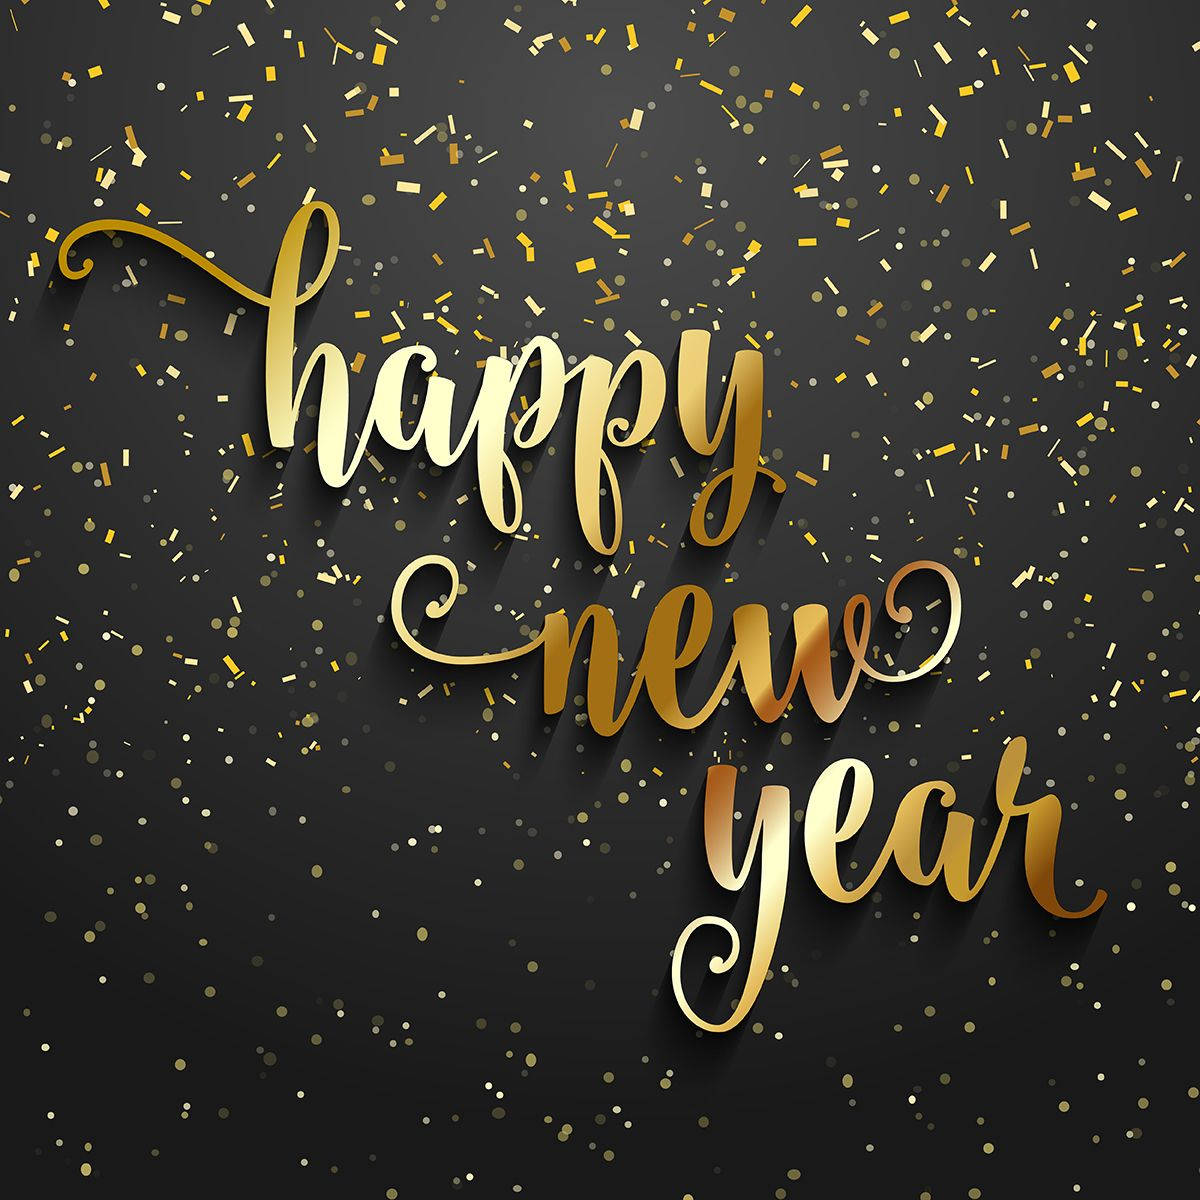 Gold Happy New Year Greetings Background